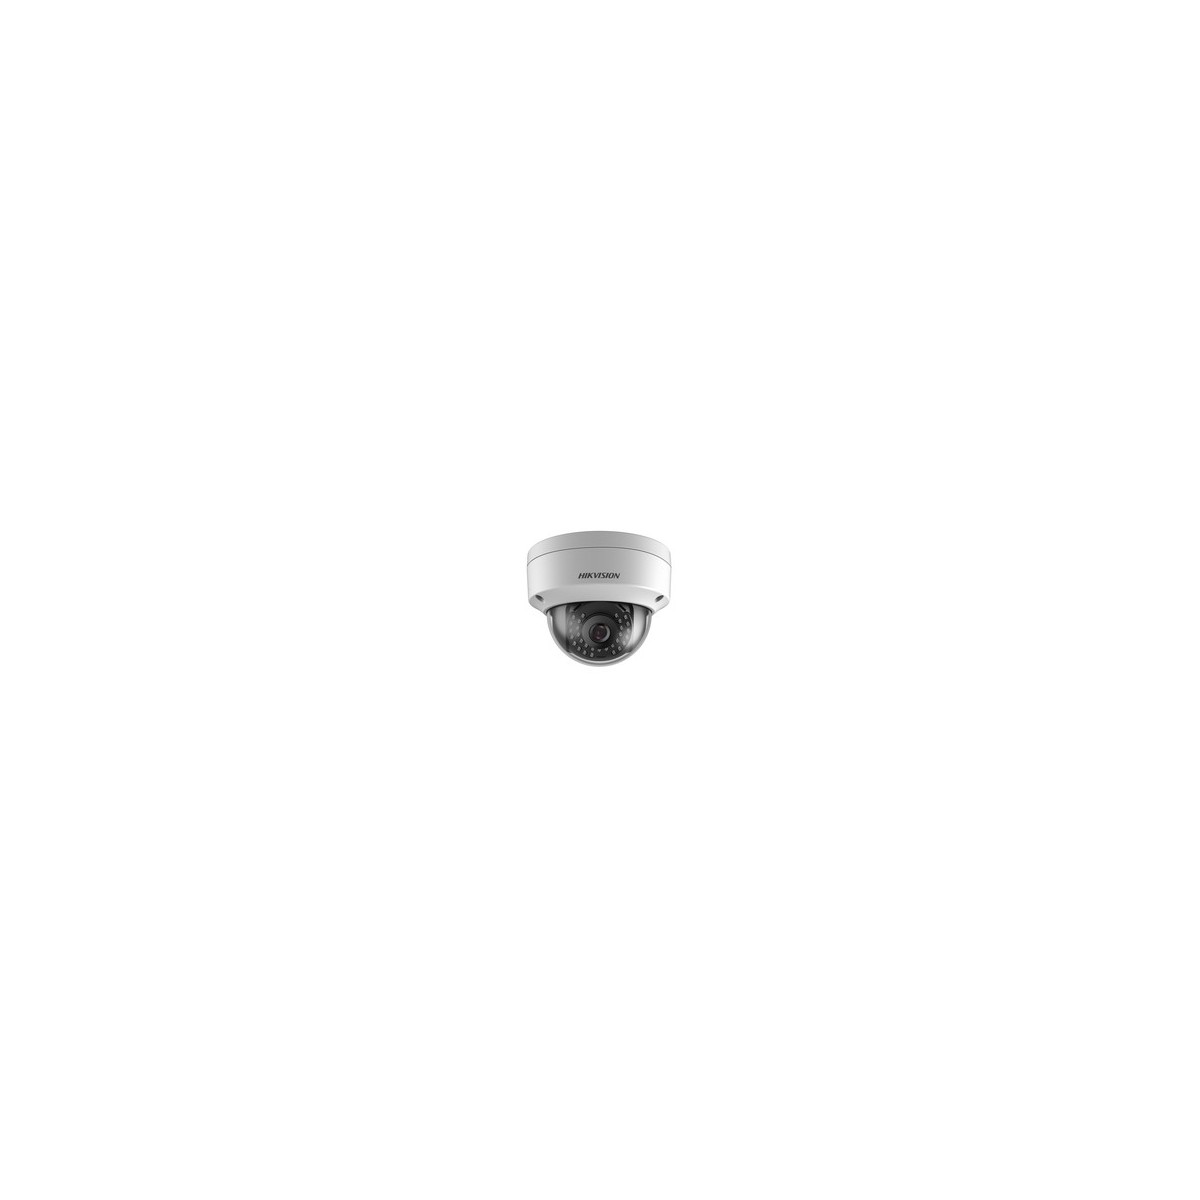 Hikvision Digital Technology DS-2CD1123G0E-I - IP security camera - Outdoor - Wired - Ceiling-wall - White - Dome